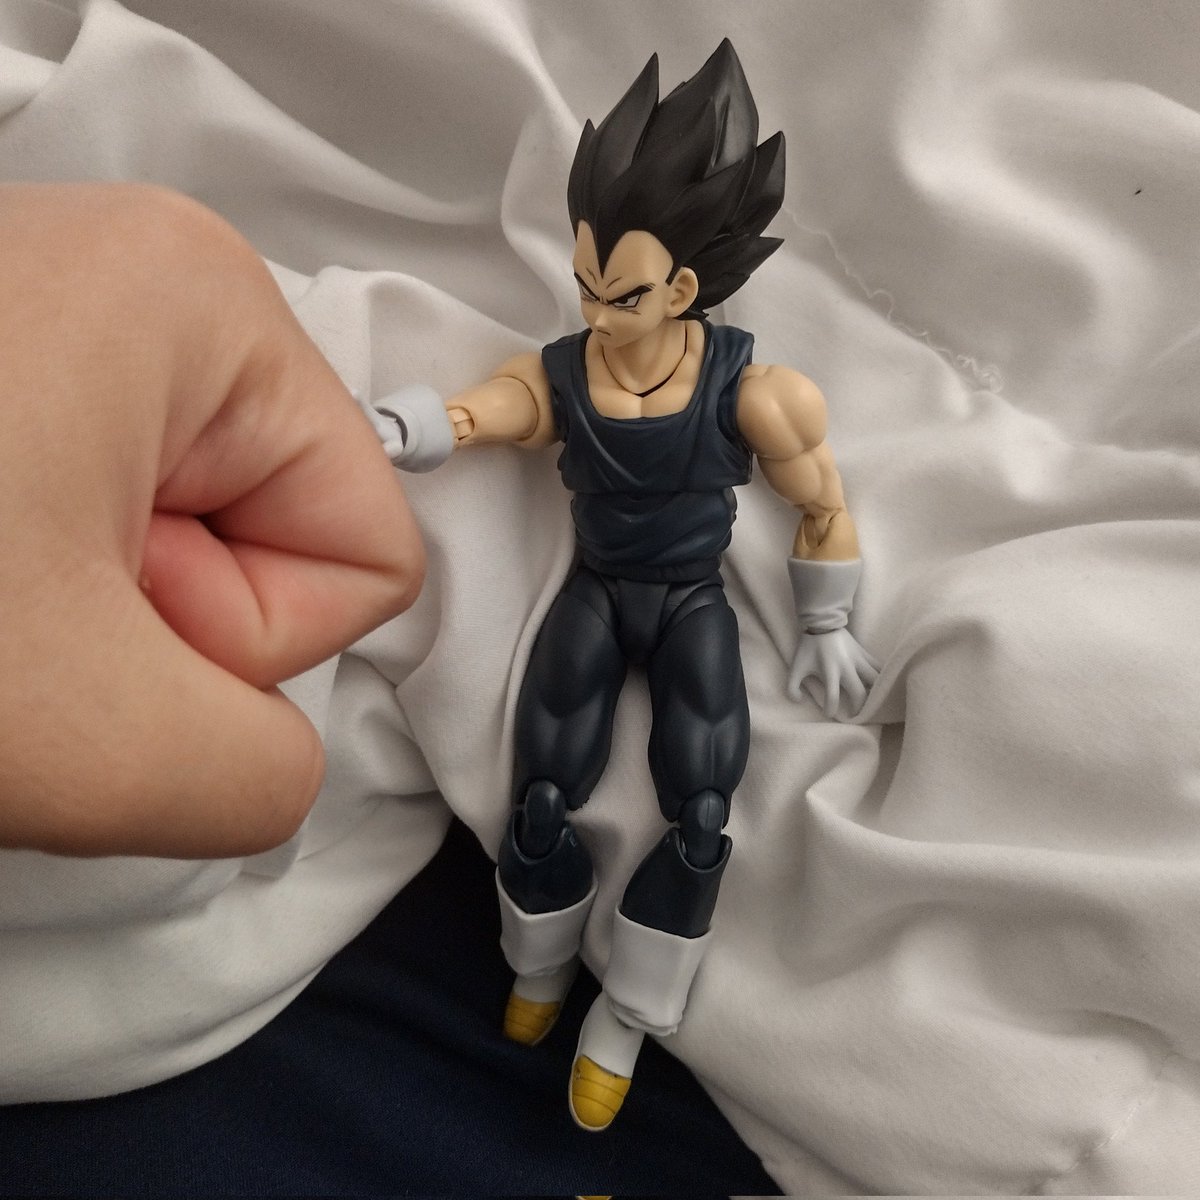 I love owning figures but I literally don't know what the hell to do with them so sometimes I just. Chill with them for a bit. What's good Vegeta how're doing